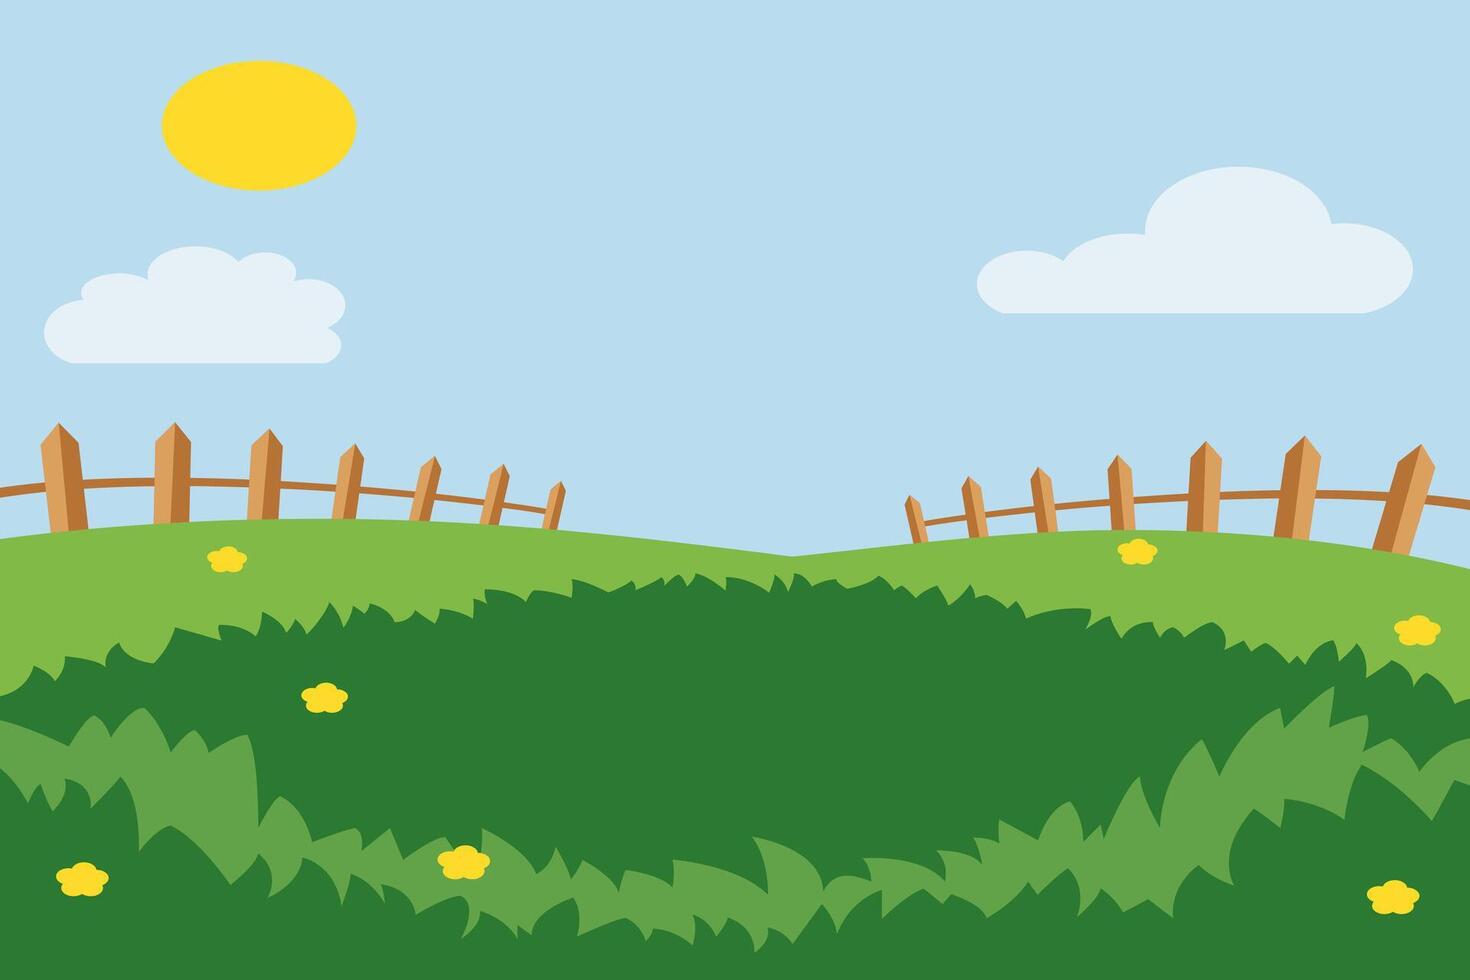 Landscape cartoon scene with green hills with flowers and a lawn with a fence and clouds on the background of summer blue sky. Flat vector